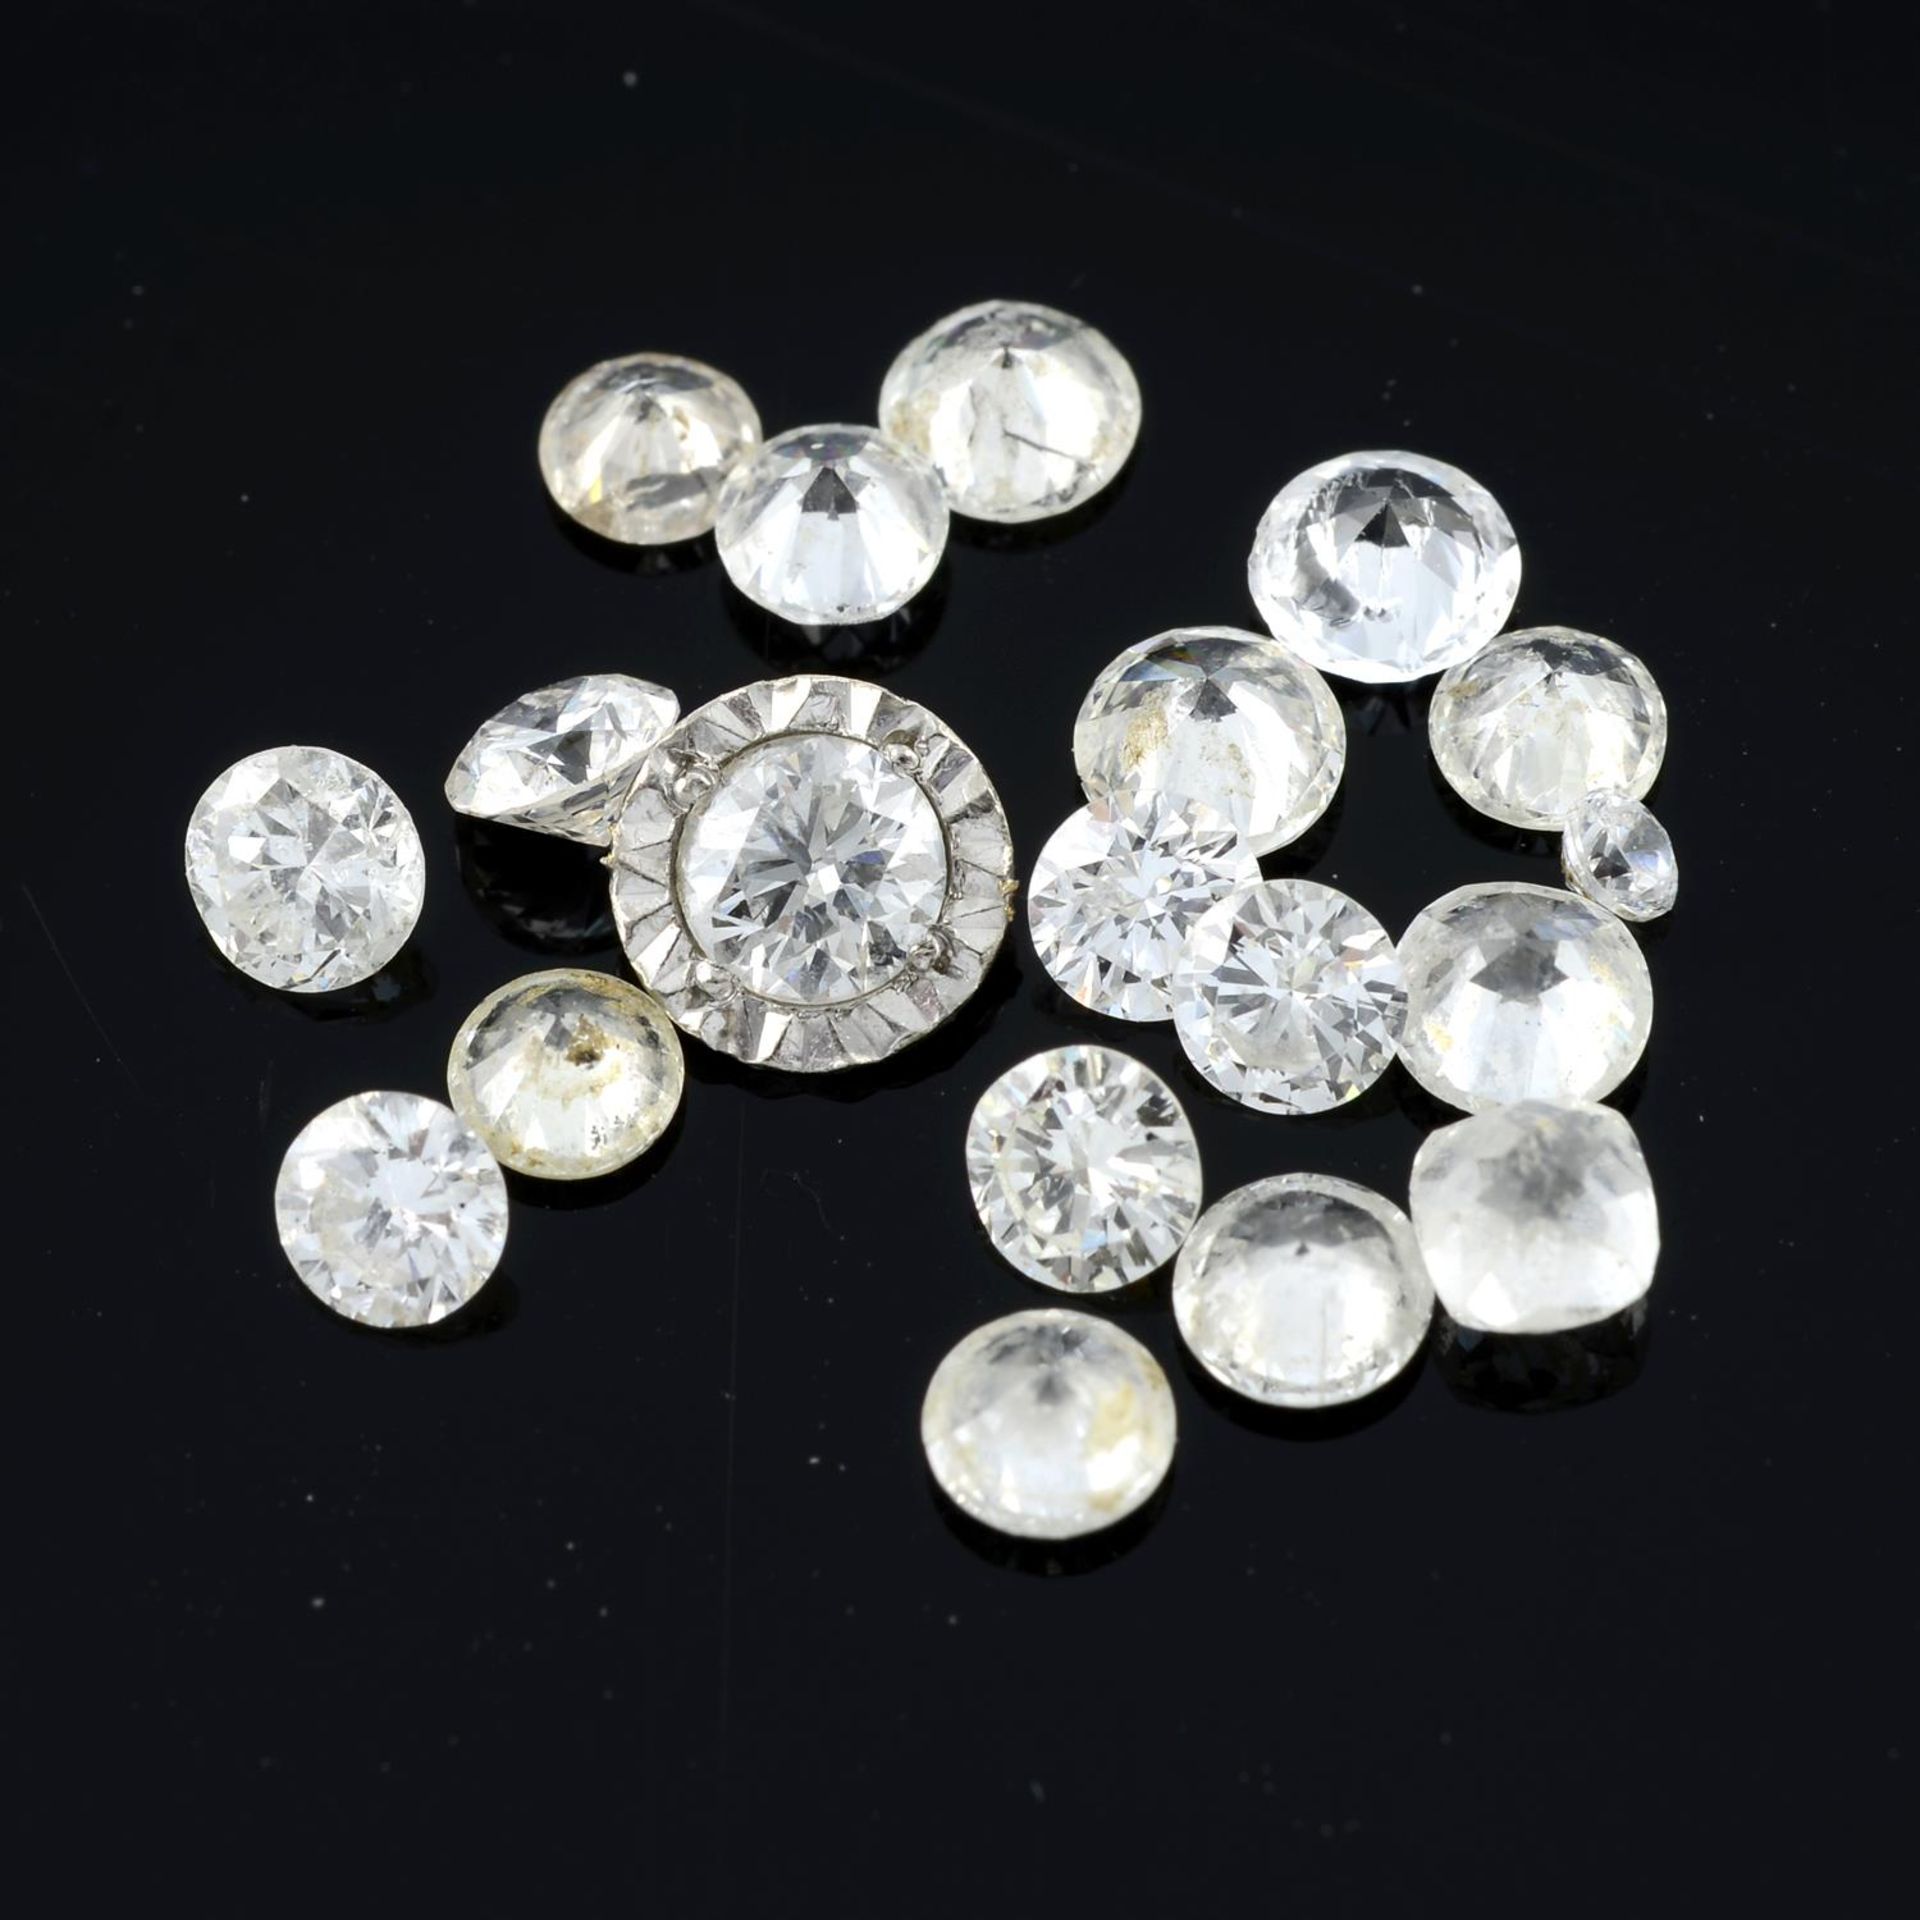 A selection of round brilliant and old-cut diamonds, approximate total weight 4.88ct.